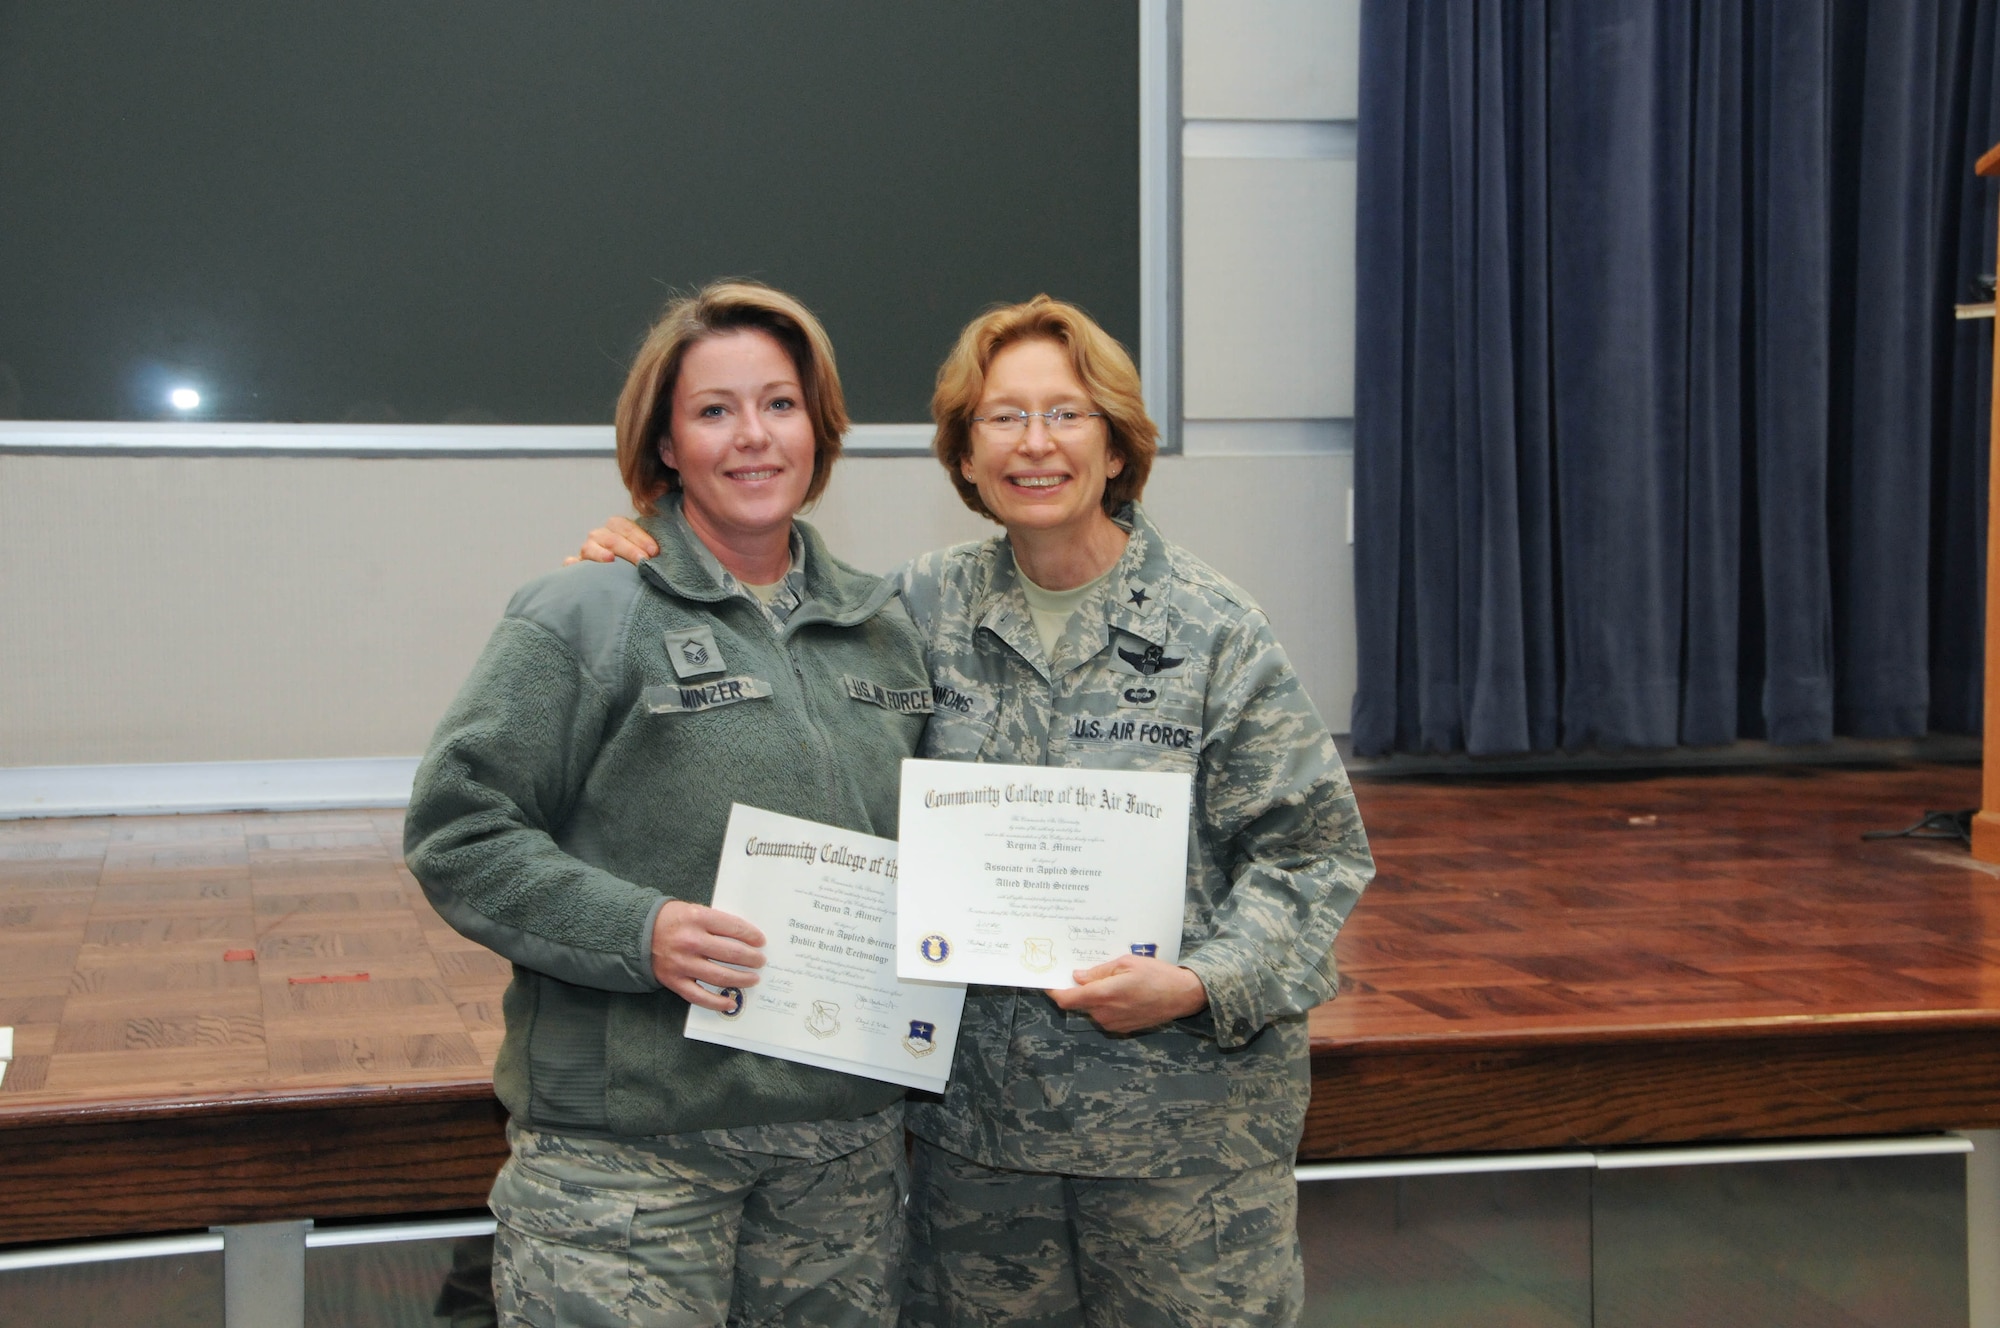 U.S. Air Force Master Sgt. Regina Minzer, left, a member of the 166th Medical Group, 166th Airlift Wing, receives a certificate from Brig. Gen. Carol Timmons, assistant adjutant general for air, Delaware National Guard to recognize Minzer’s attainment of a Community College of the Air Force associate of applied science degree in public health technology and a second AAS in allied health sciences at a CCAF Class of October 2013 graduation ceremony held Nov. 3, 2013 at the New Castle Air National Guard Base, Del. (U.S. Air National Guard photo by Tech. Sgt. Robin Meredith)